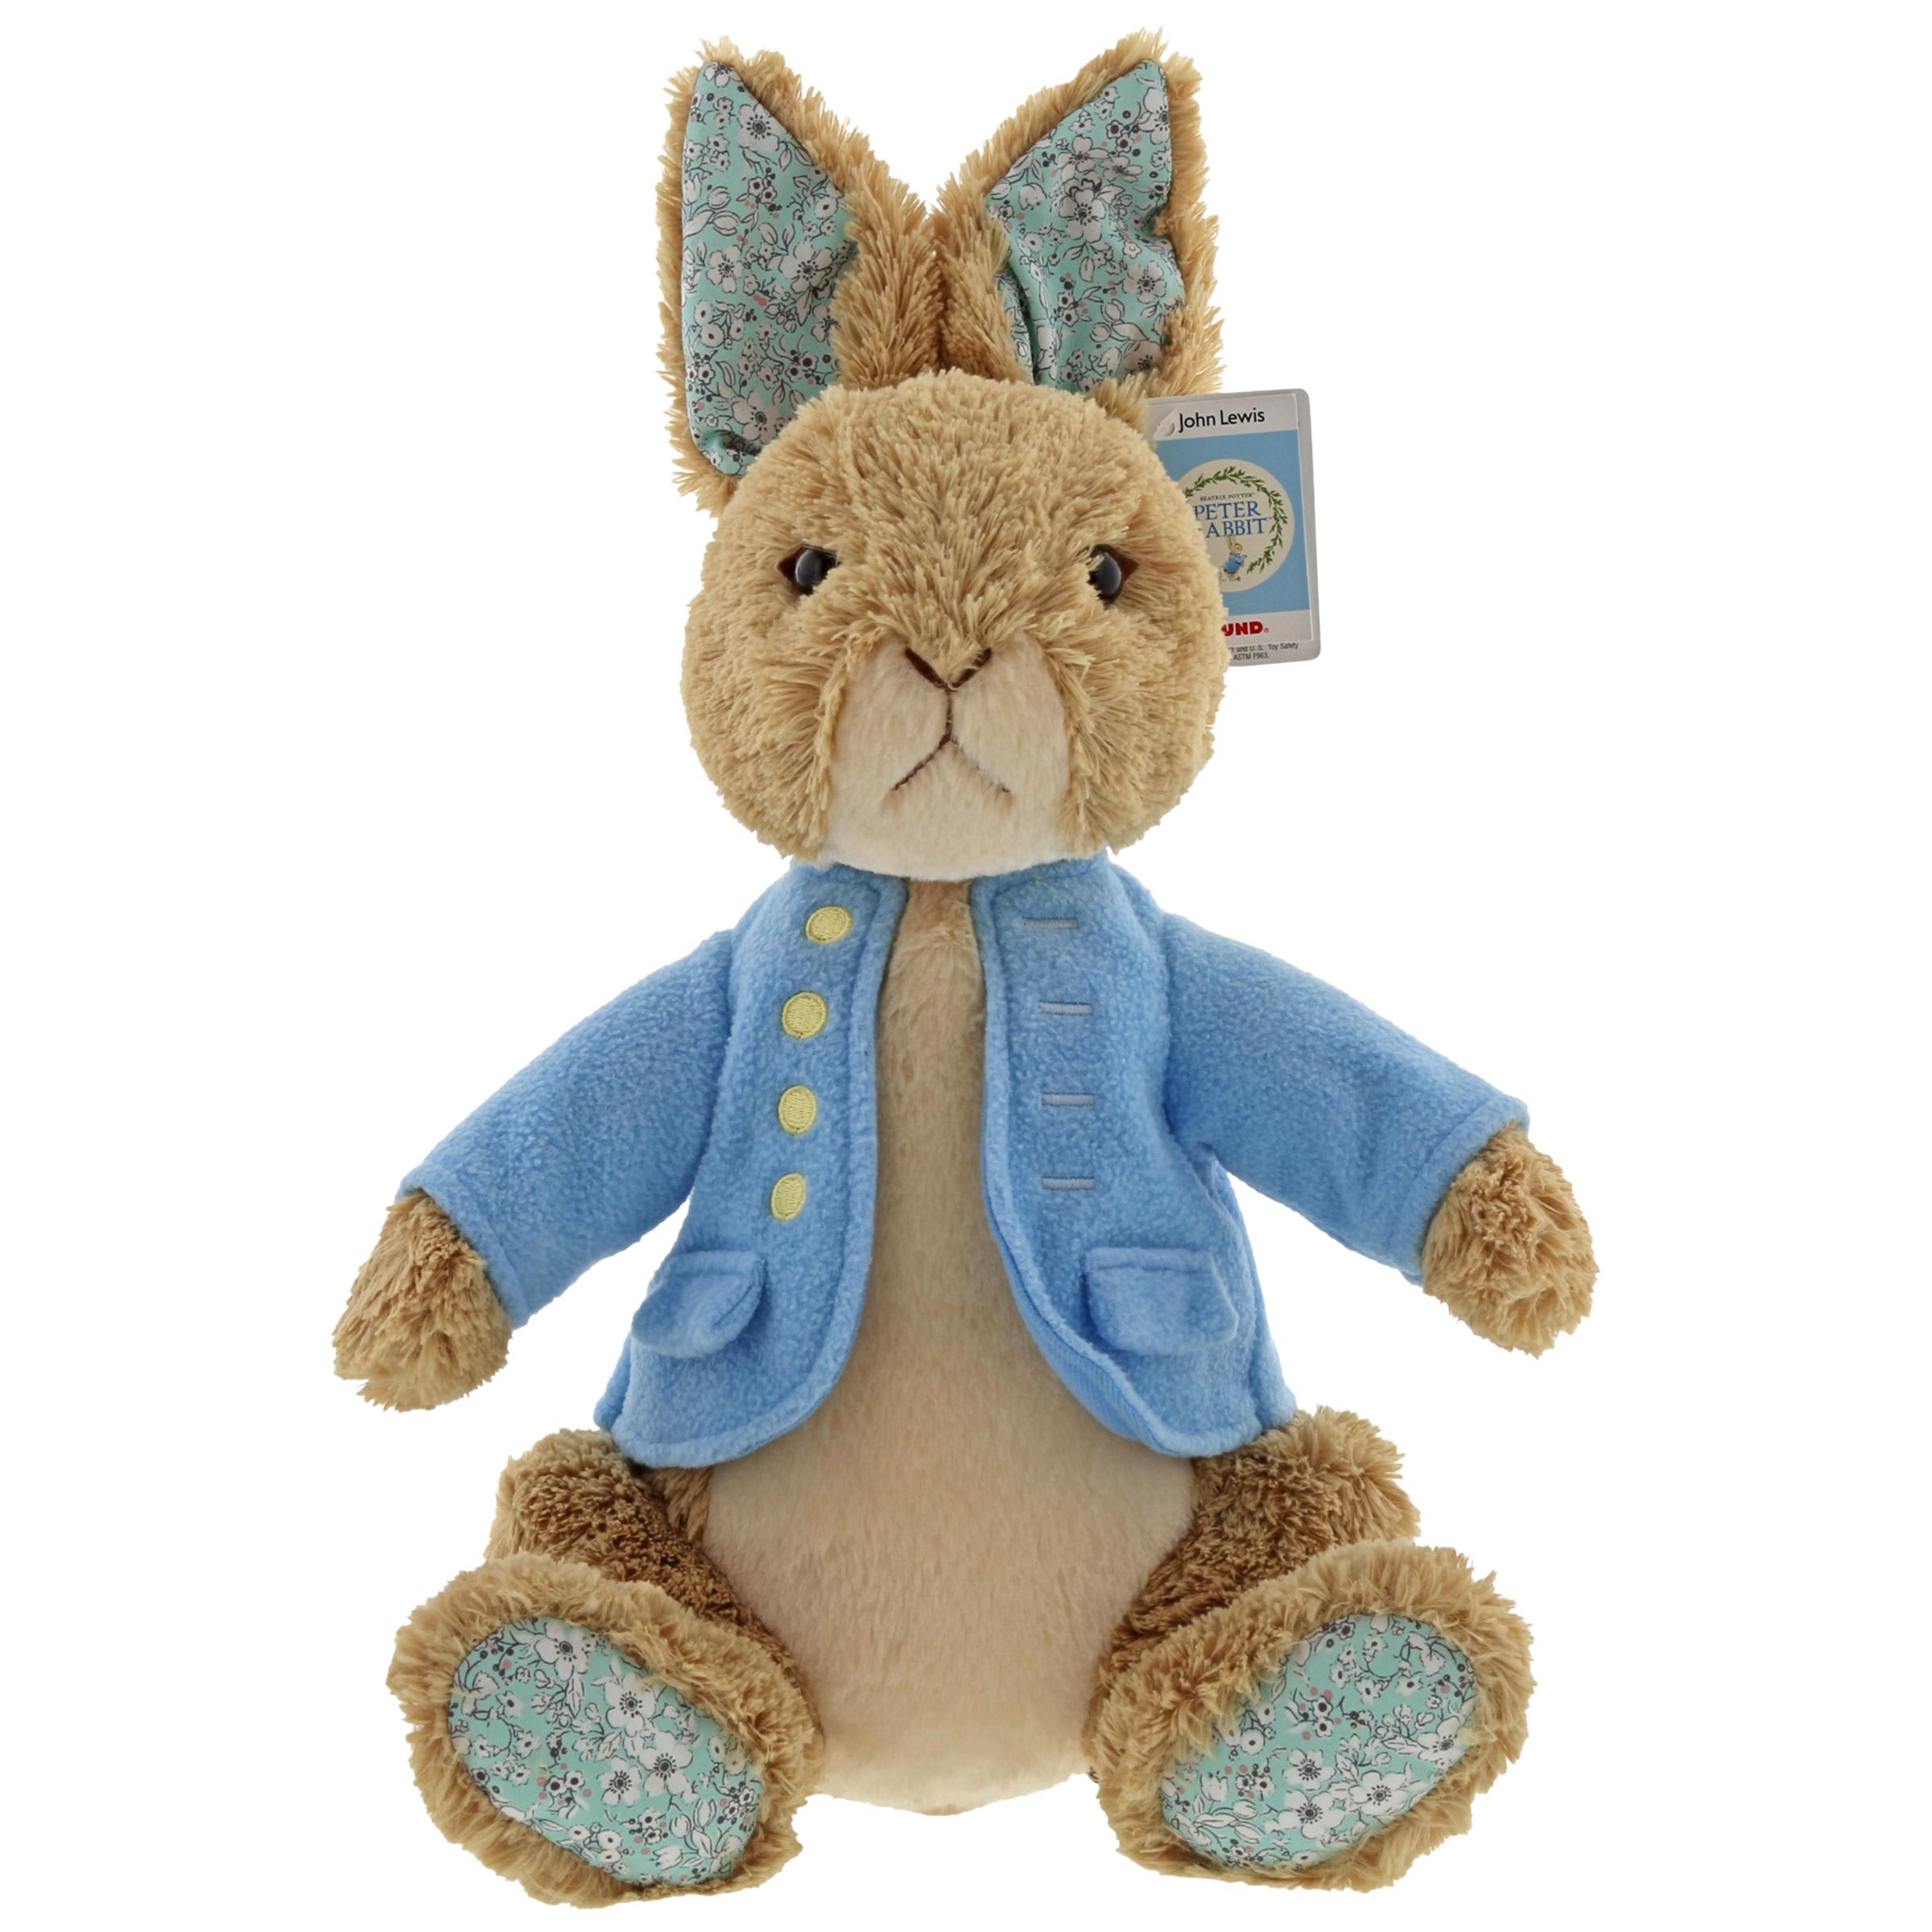 john lewis toy offers